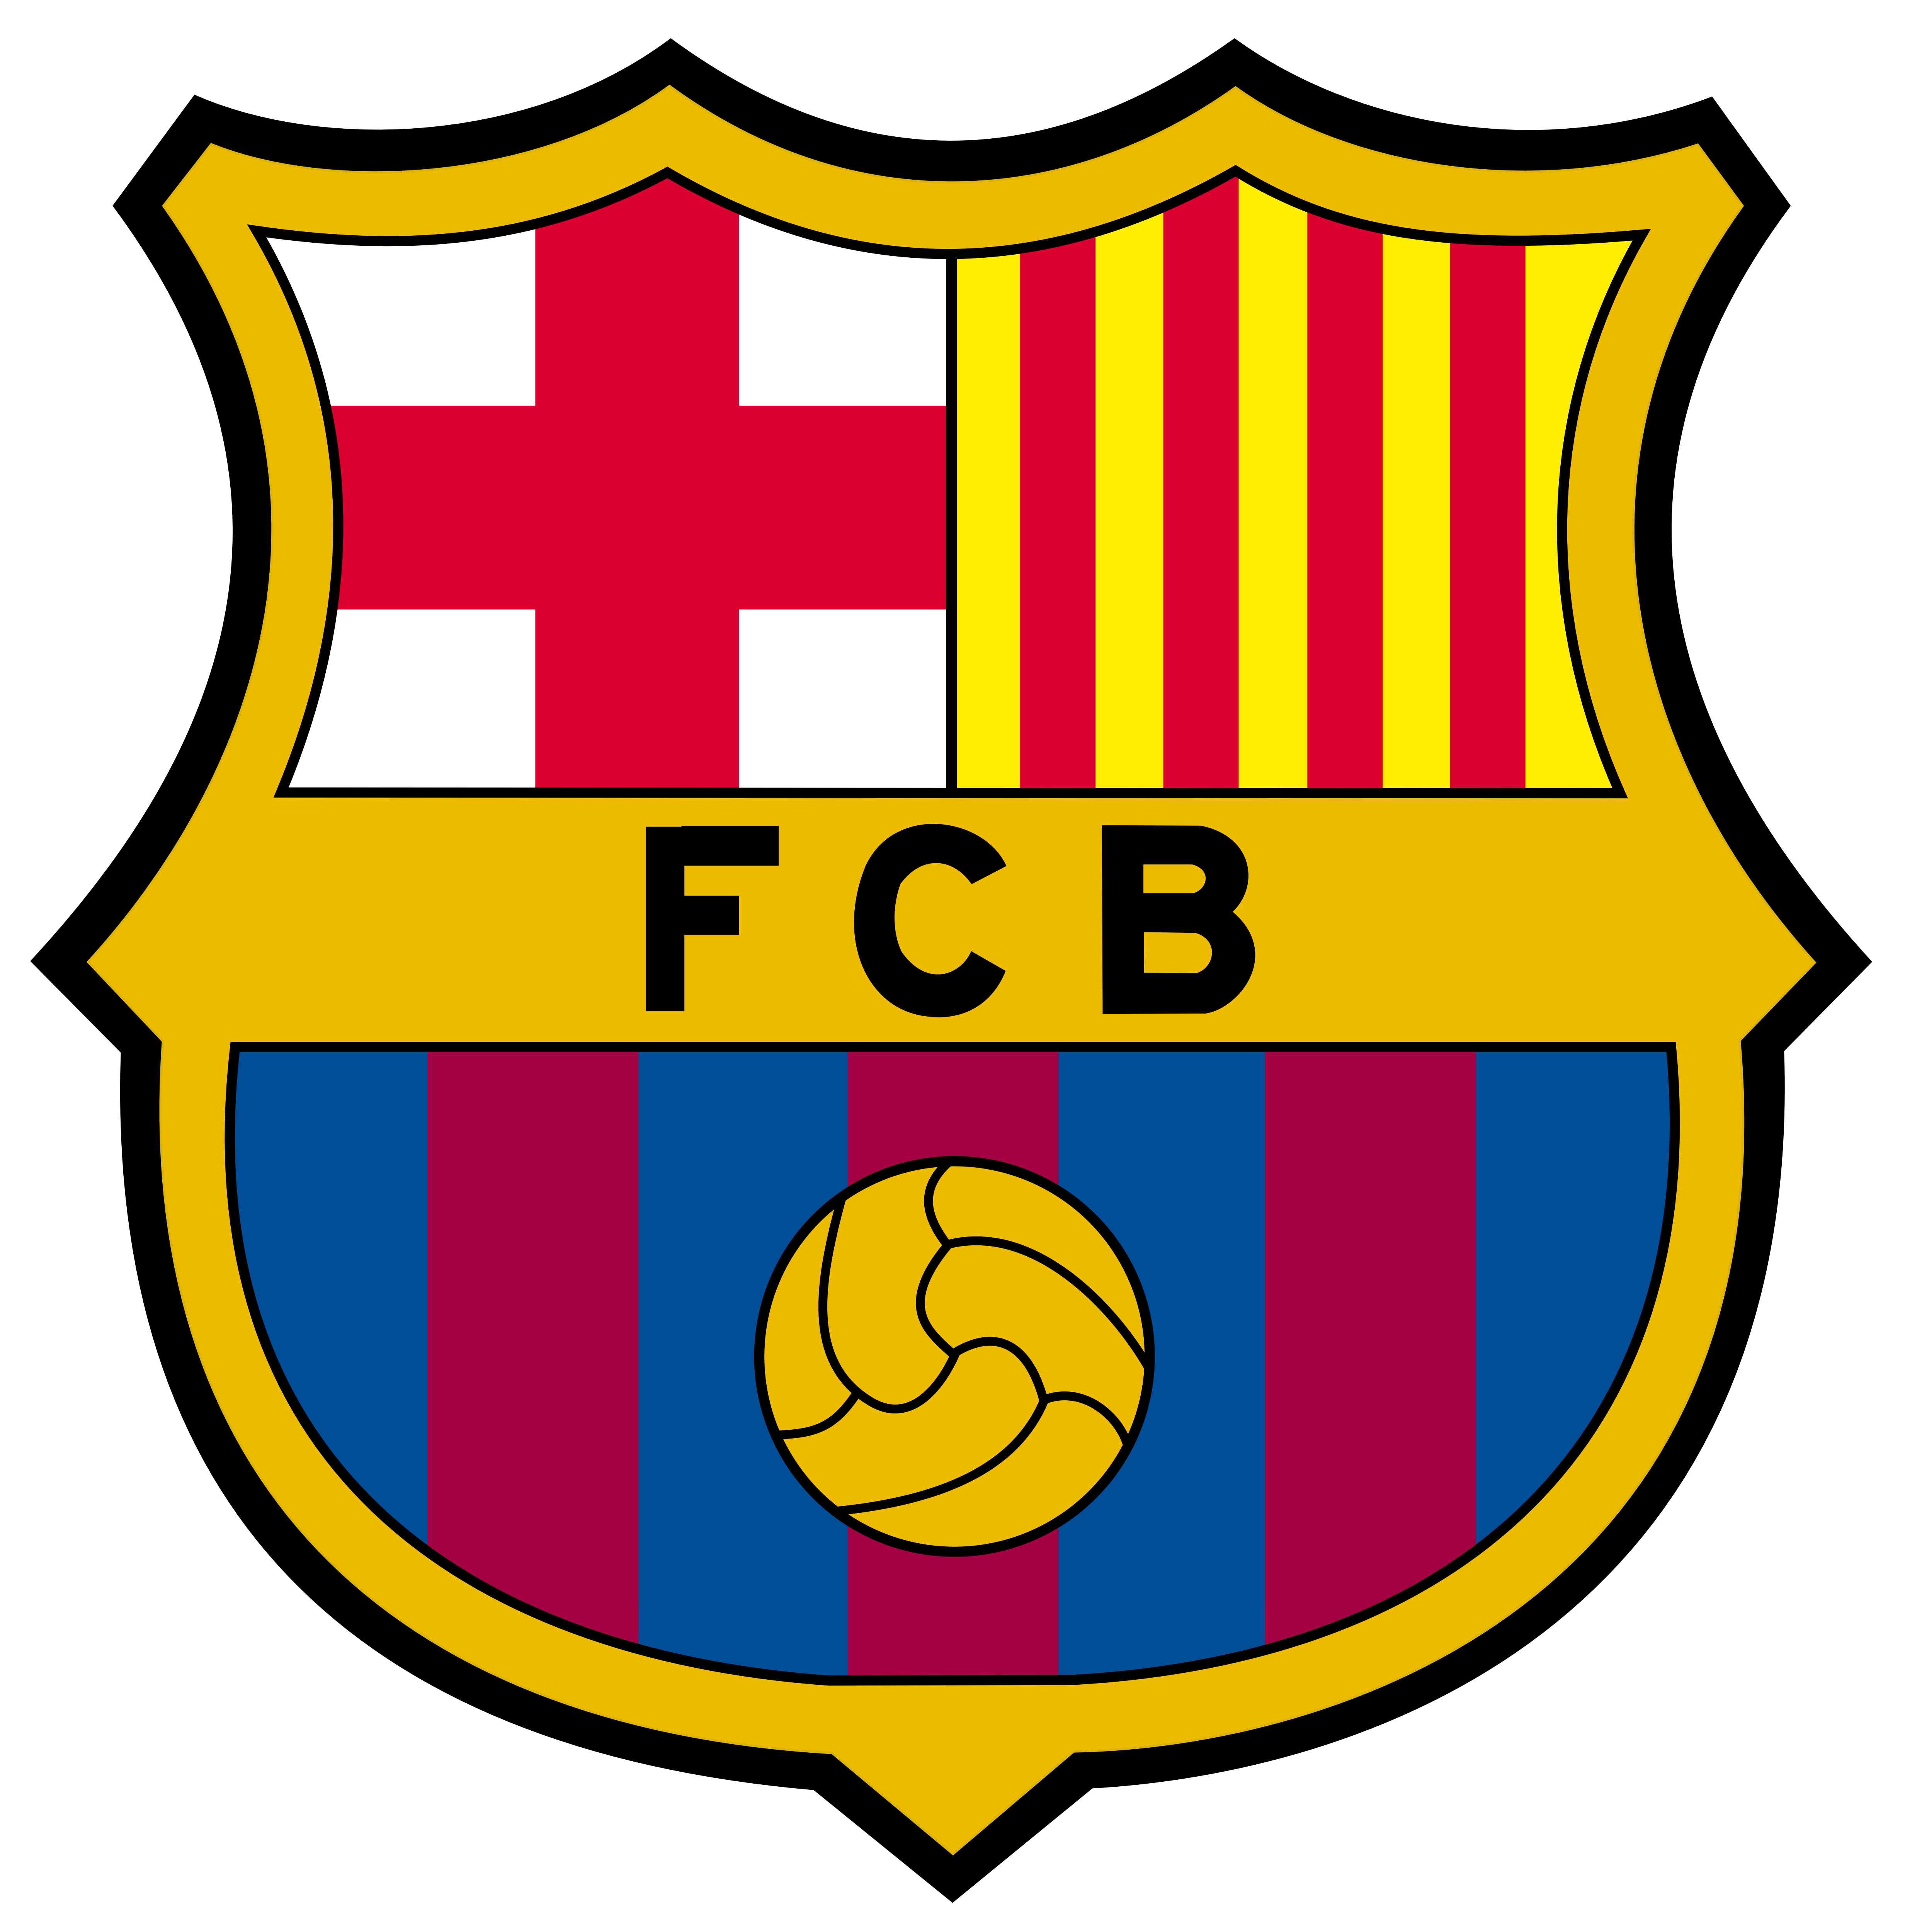 List 104+ Images pictures of fc barcelona logo Latest